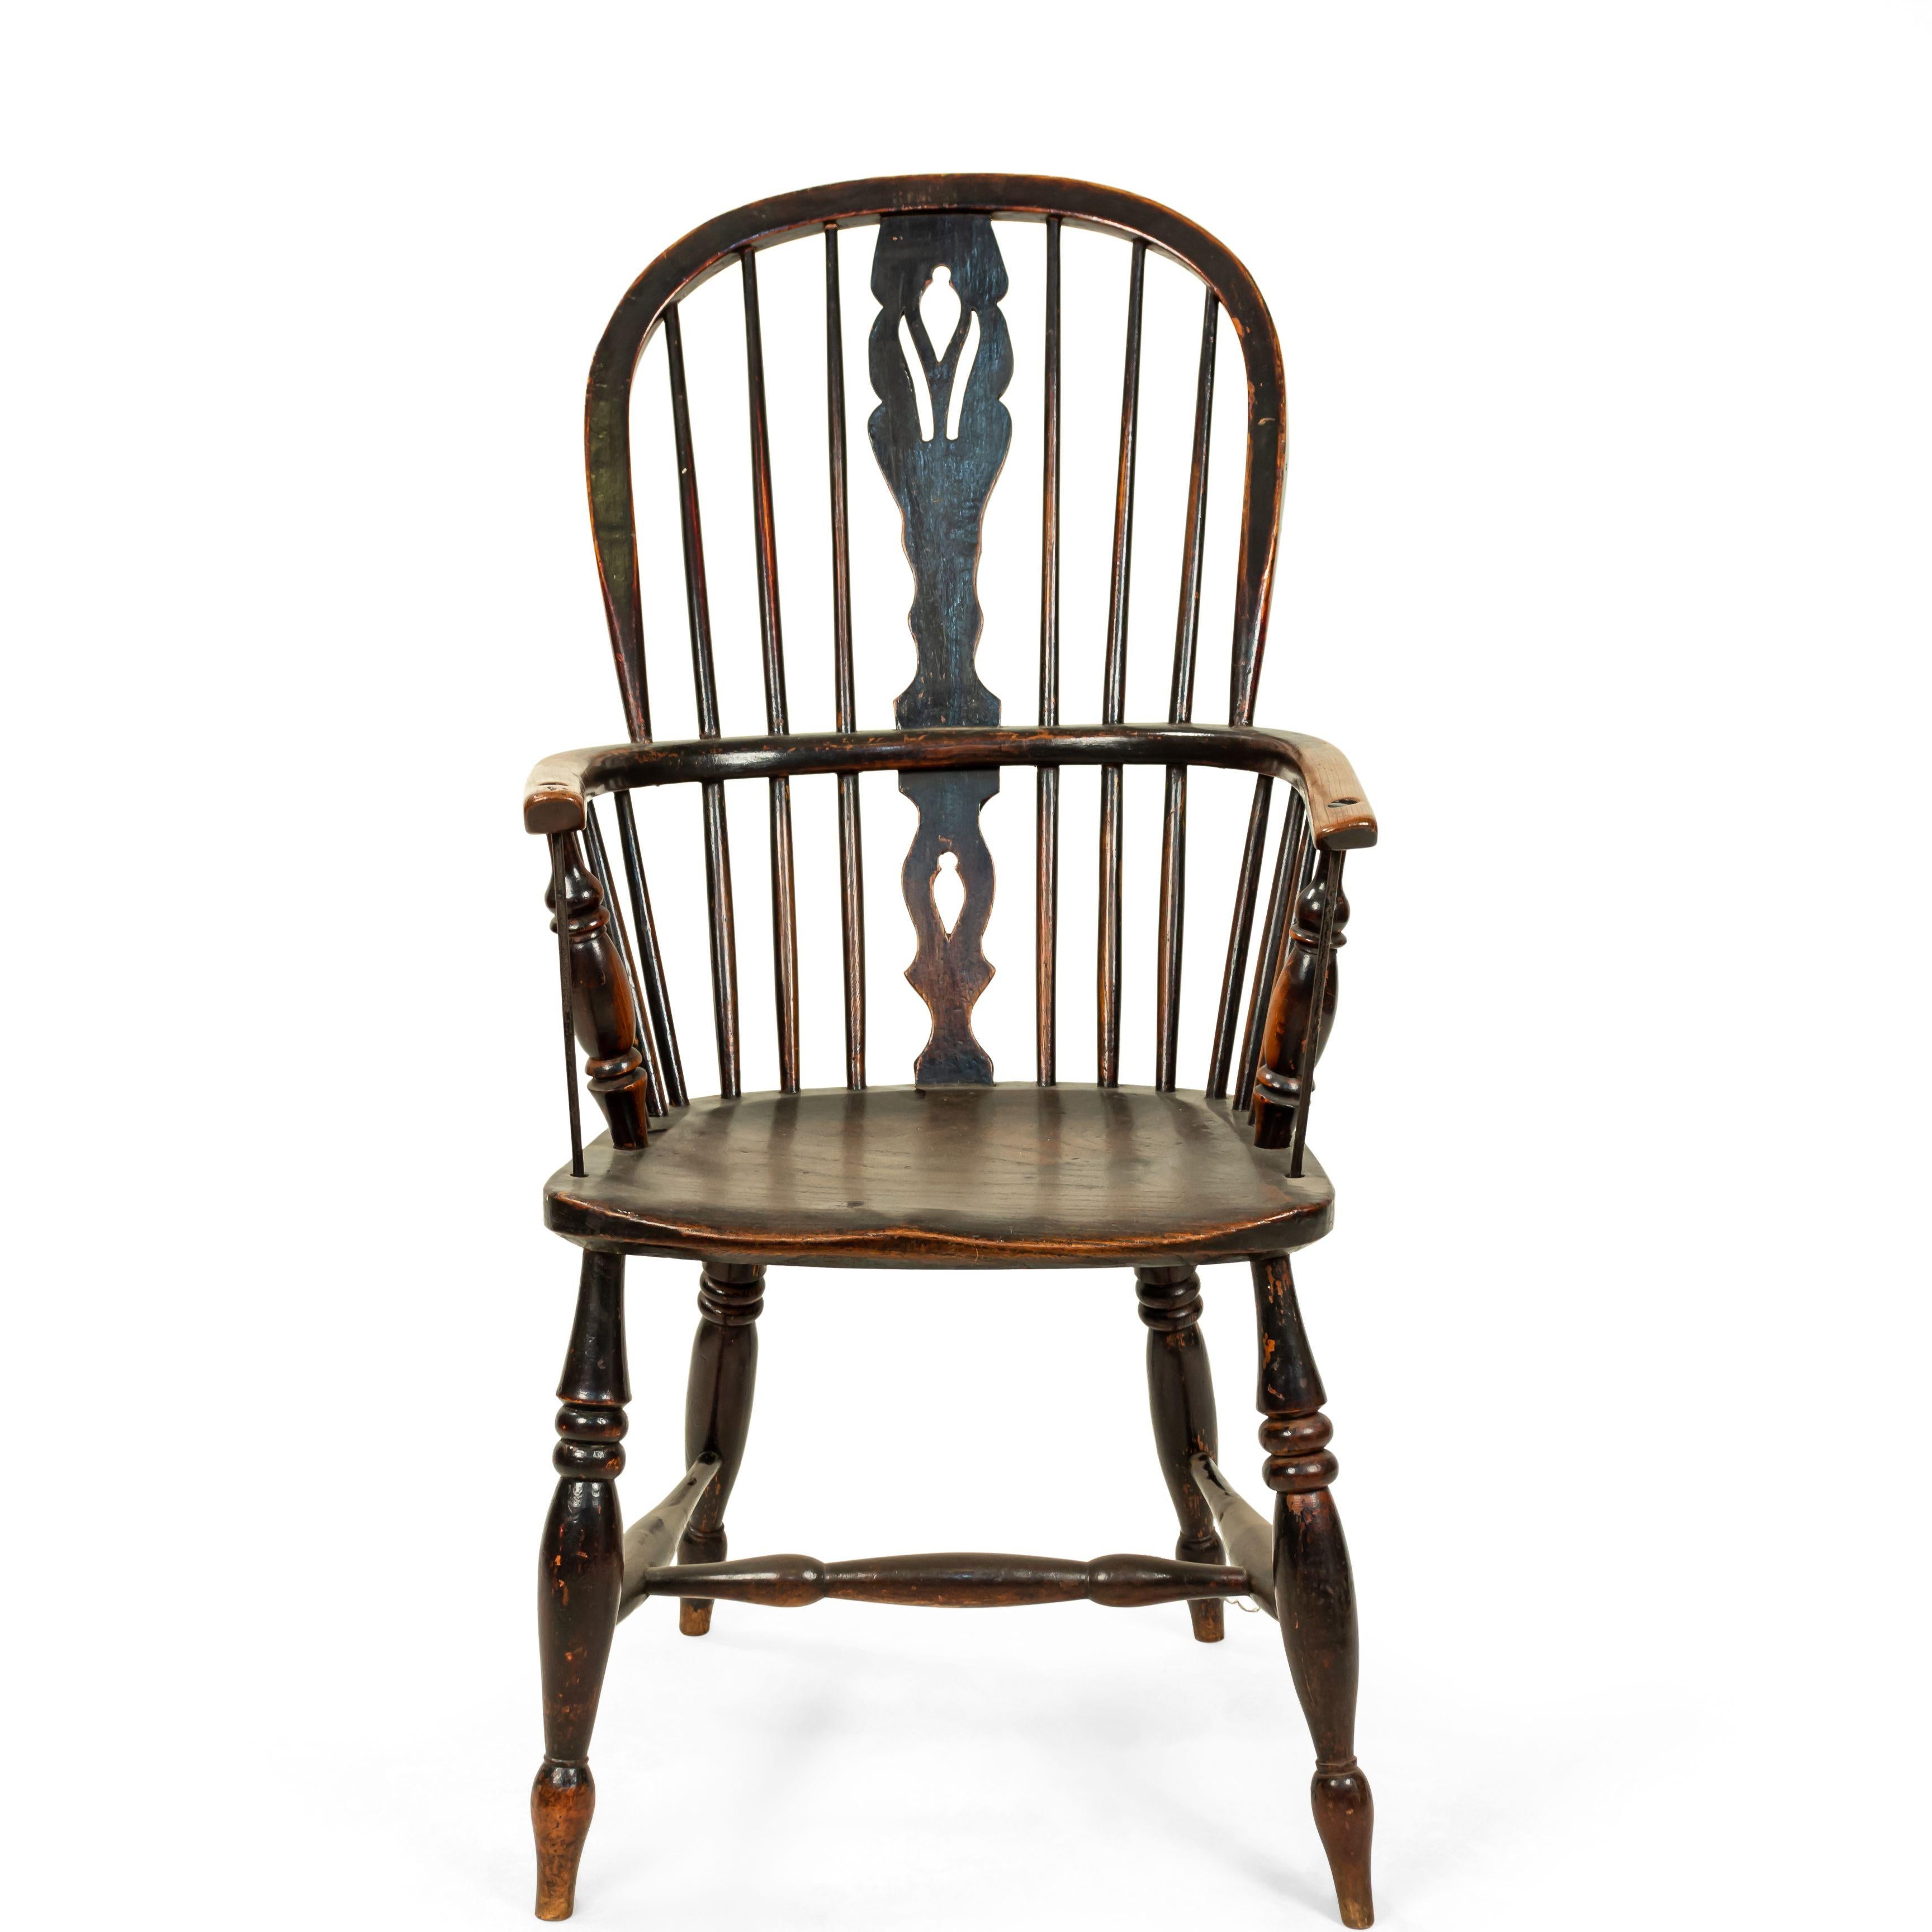 English Country antique Windsor armchair with spindle and open splat back with metal rods. (19th century).